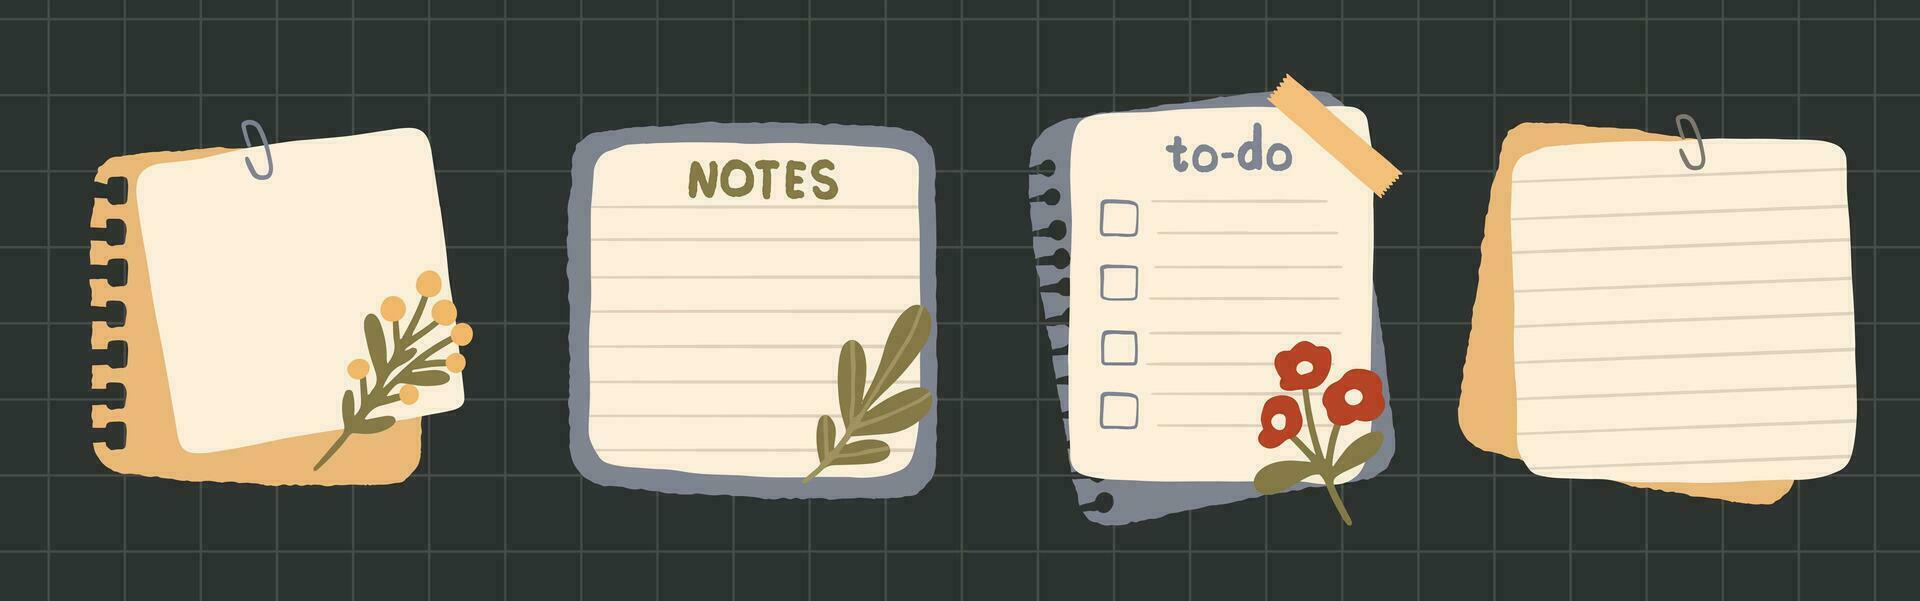 Set of cute Cartoon Sticky Notes. Dairy planner or bullet journal Memo stickers vector